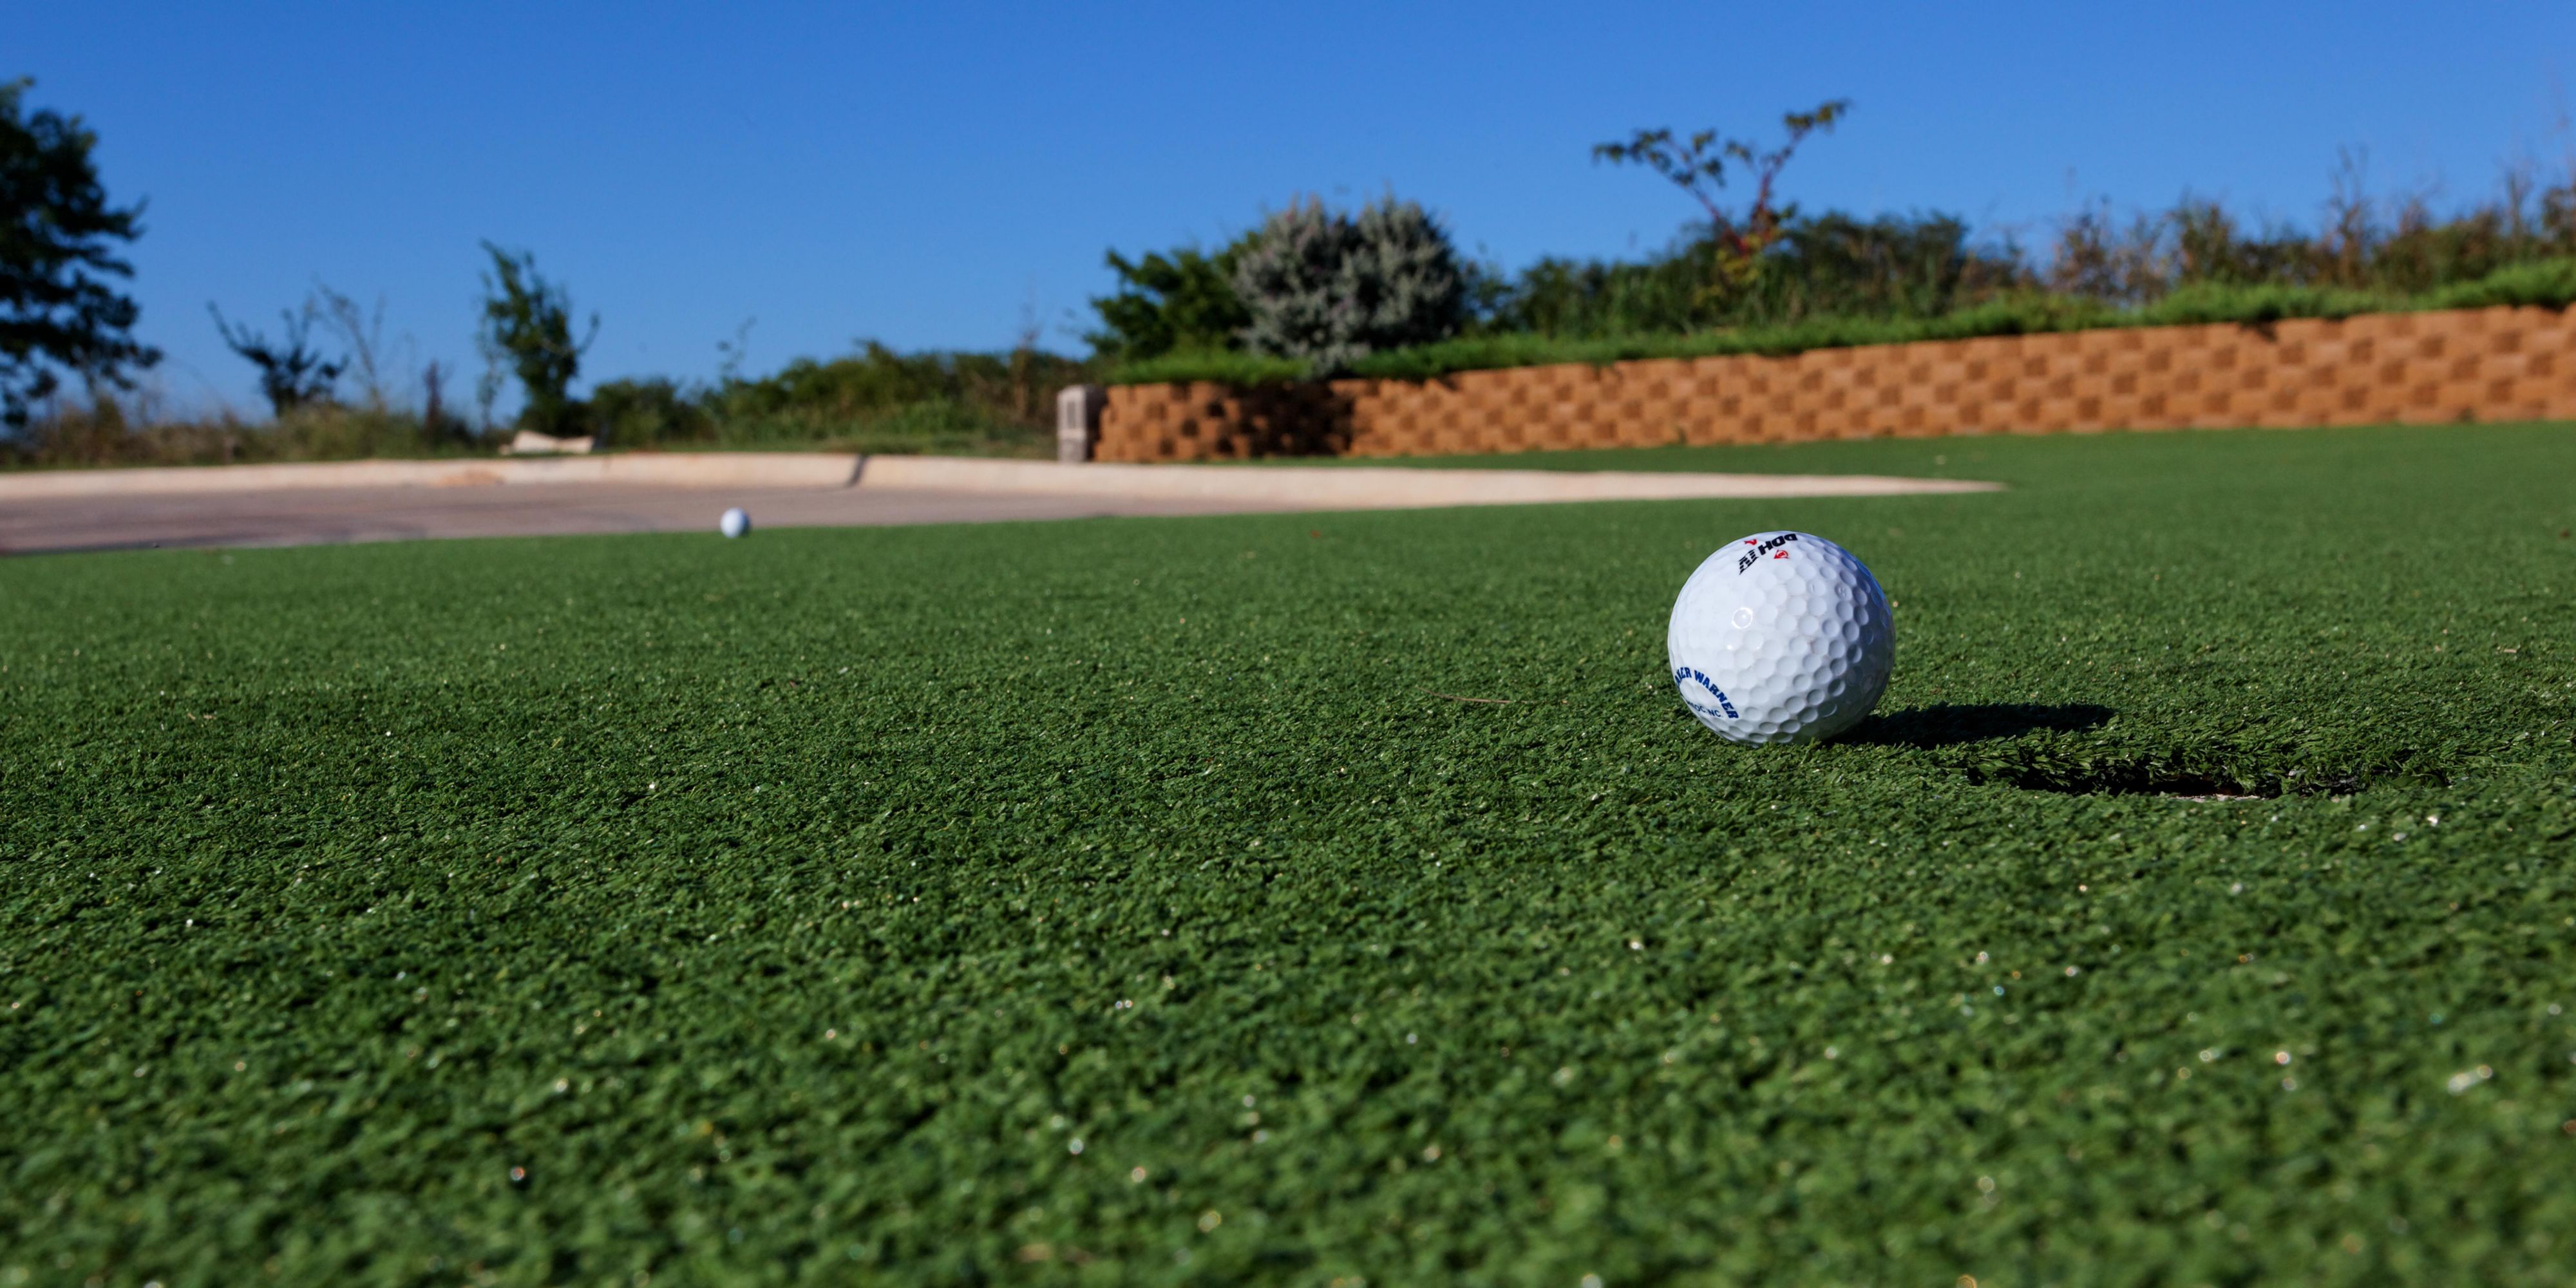 How about a fun game of 3 hole?  We have you covered.  After getting settled in your guest room, stop by the front desk to check out a set of golf club and golf balls to have a friendly game.